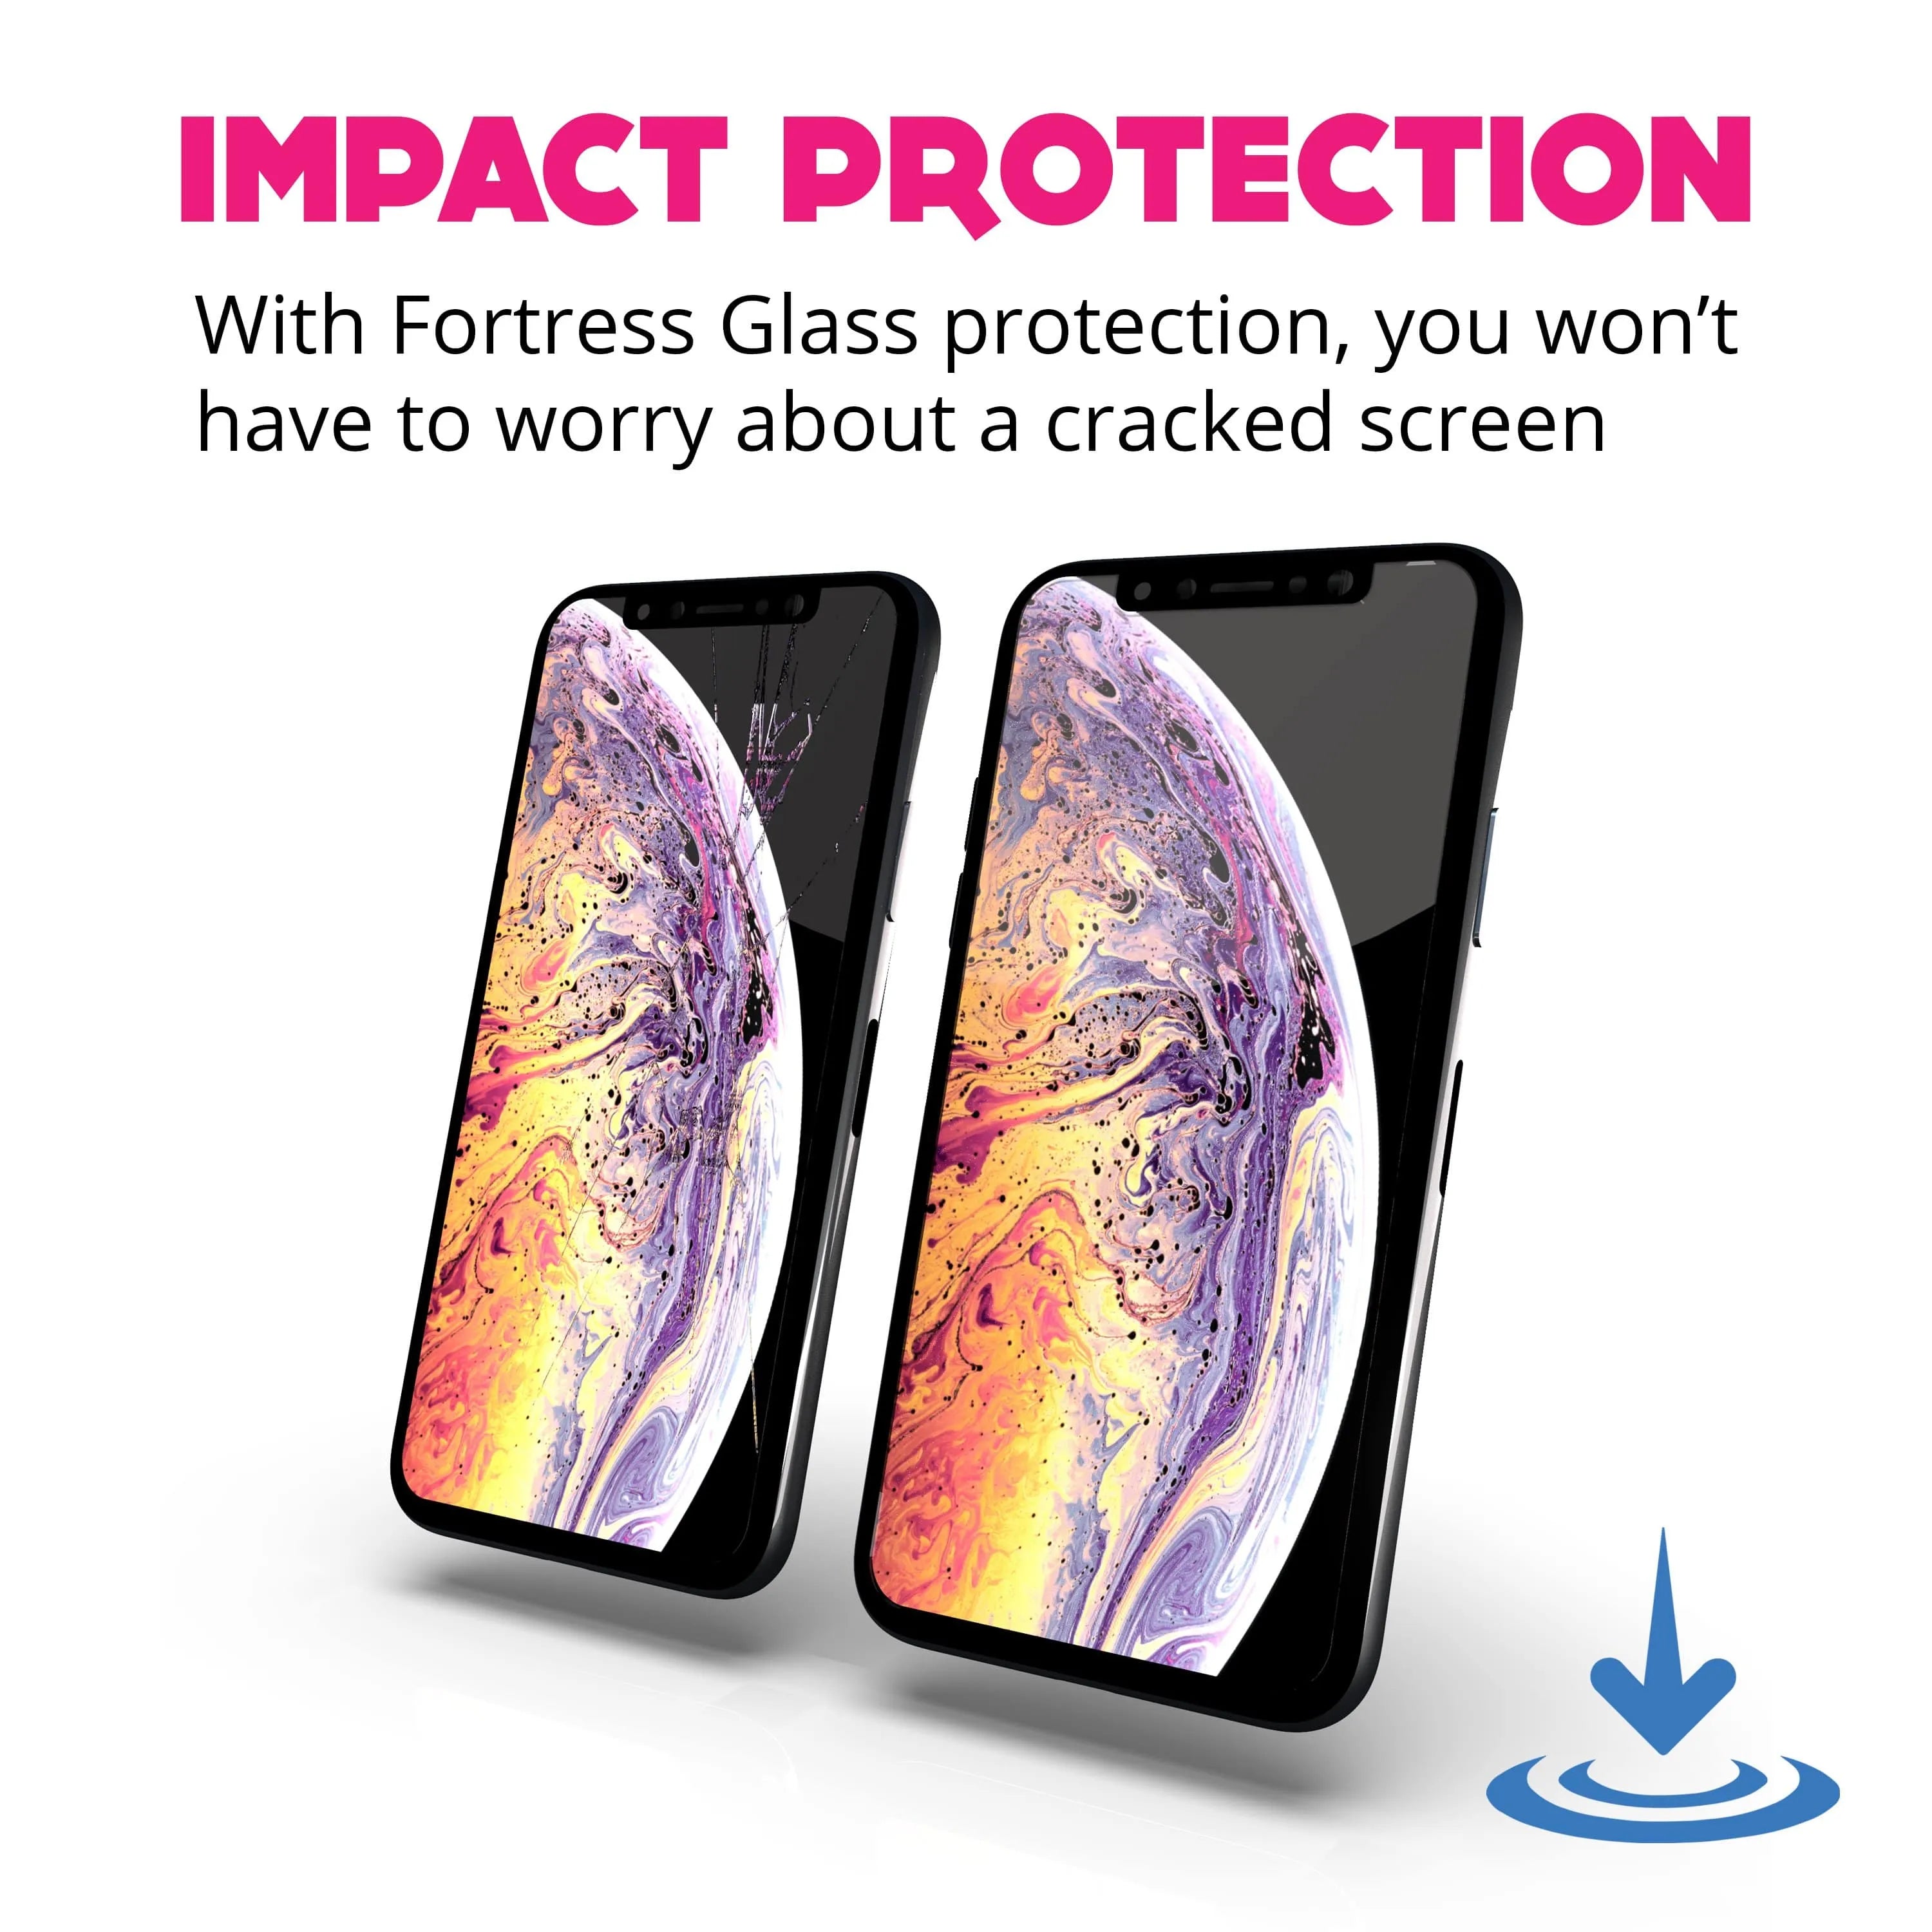 Fortress iPhone 12 Pro Max Screen Protector - $200 Device Coverage  Scooch Screen Protector